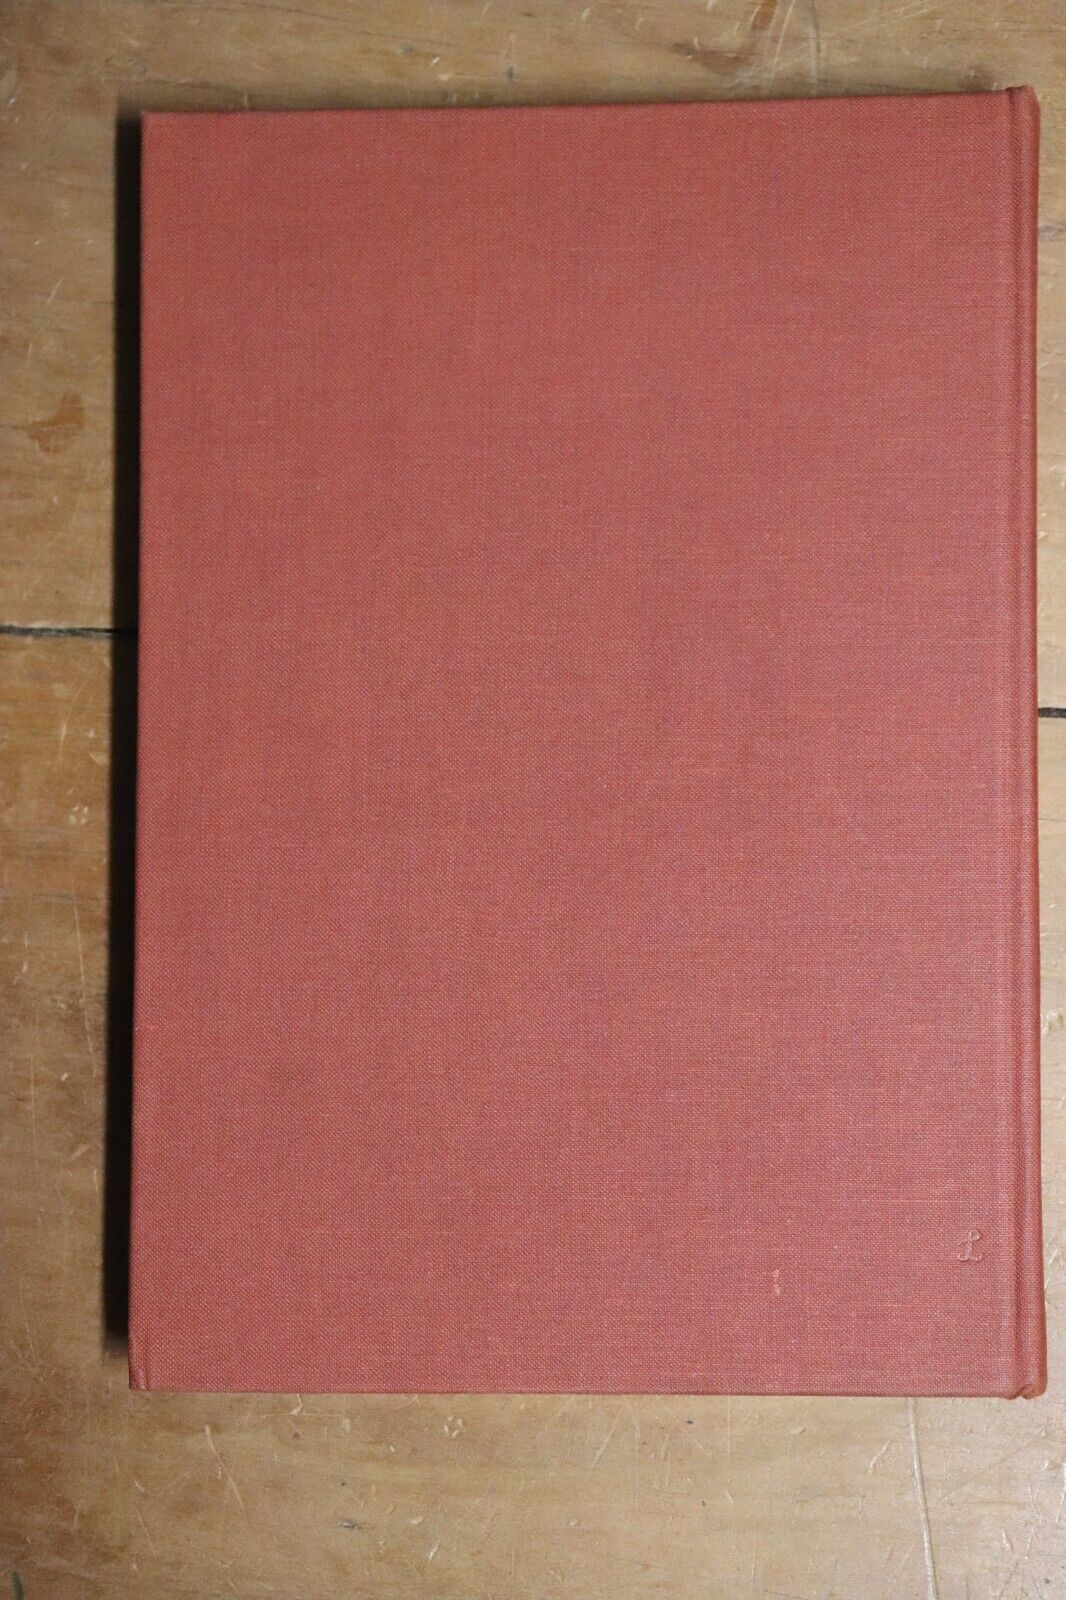 Majorca Observed by Robert Graves - 1965 - Travel & Exploration Book